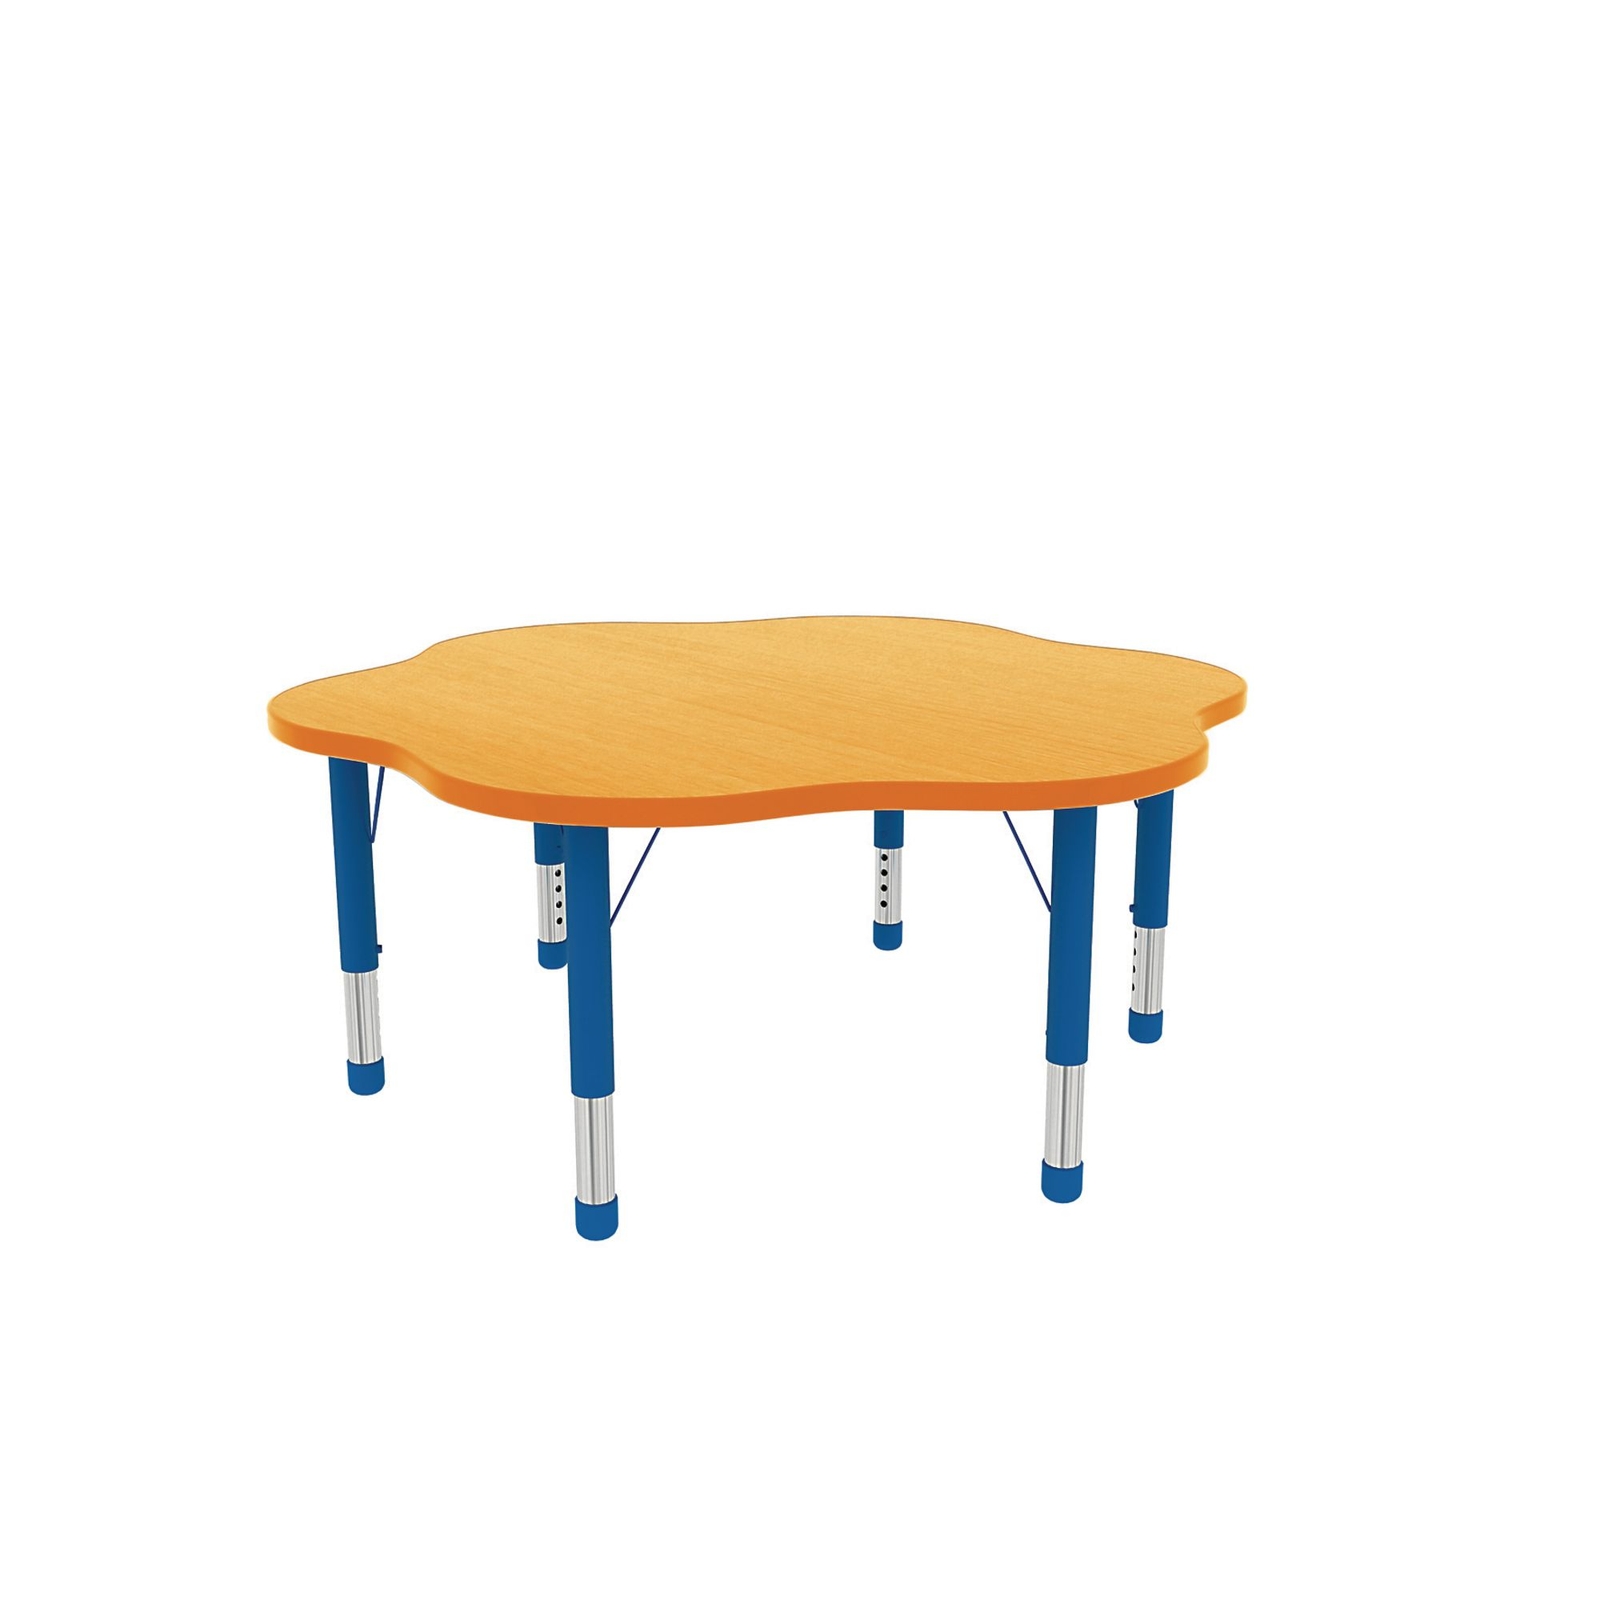 Milan Flower 48mm Tubular Classroom Table - 1200 x 370 to 620mm - red